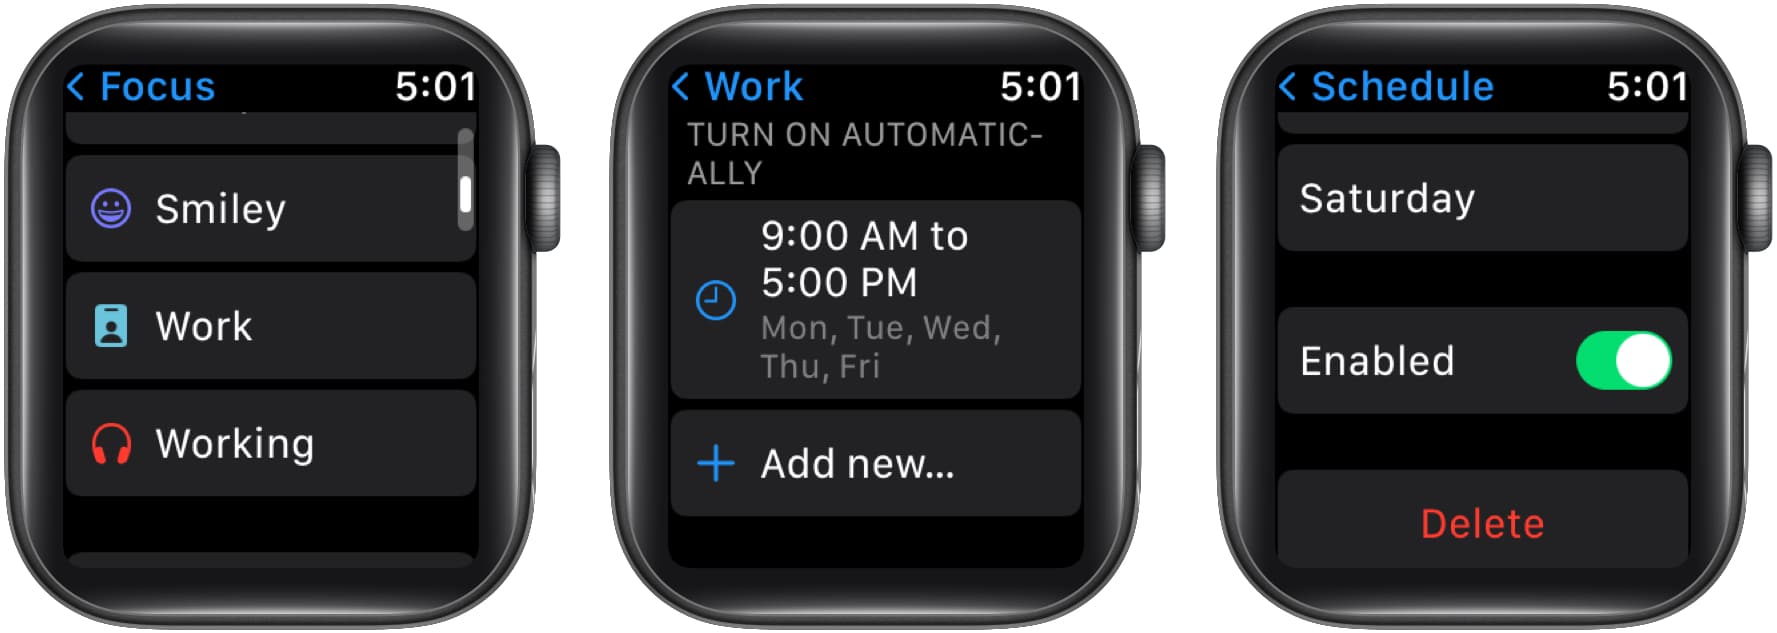 How to delete or disable a Focus schedule on Apple Watch